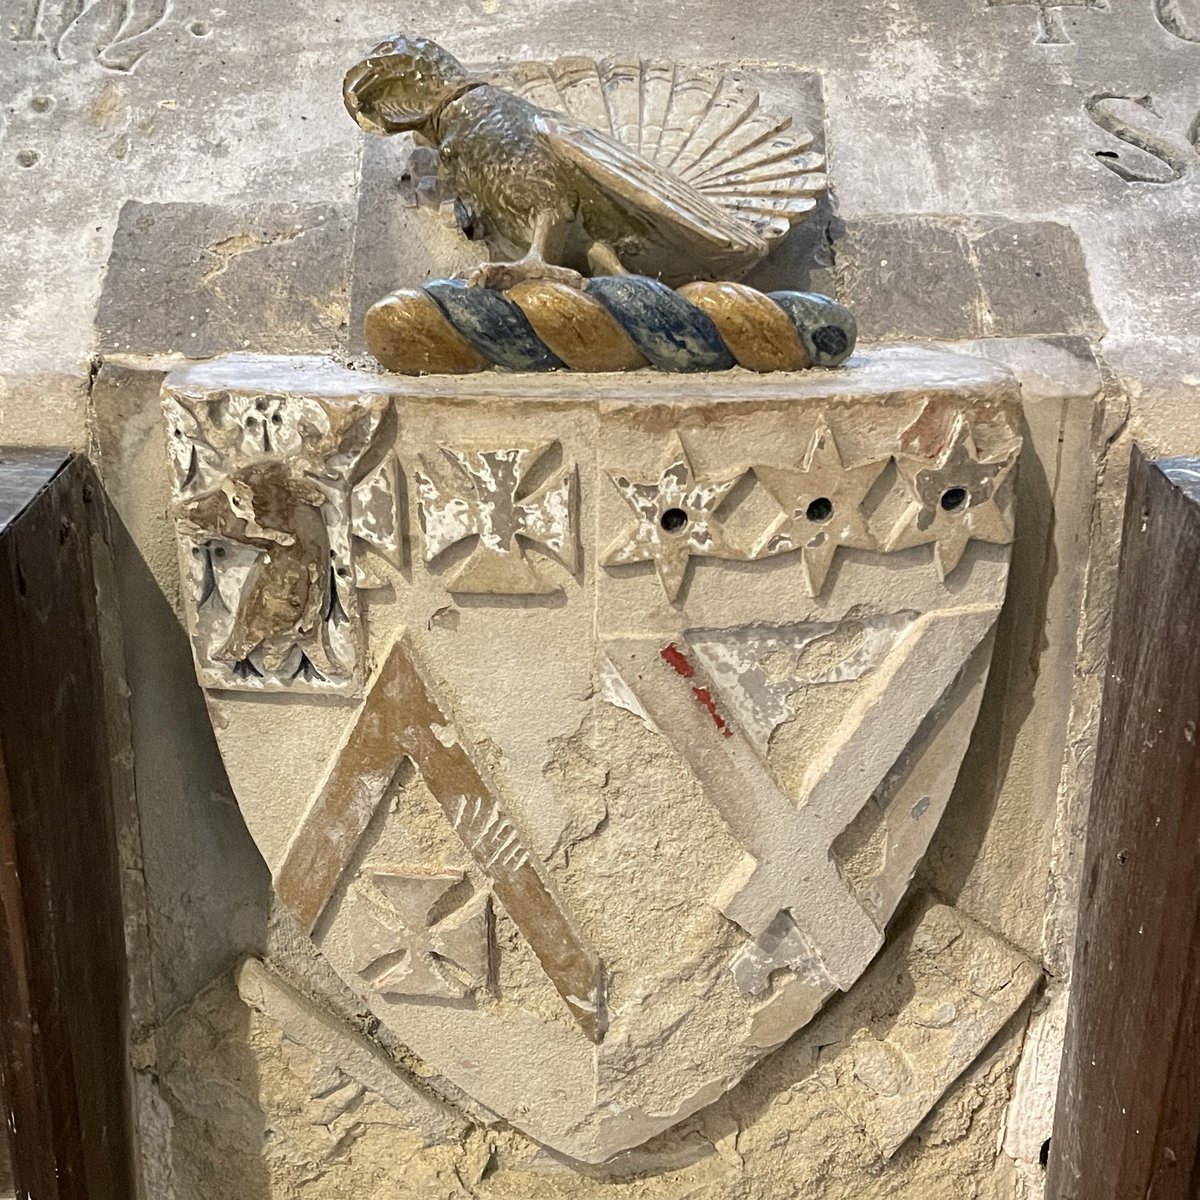 It’s not very seasonal to be talking turkey in May but I was reminded of William Strickland when I saw his coat of arms at St Mary’s Deerhurst, yesterday. Read about him here rosemarygriggs.co.uk/blog/36/ #turkey #LesArmoiriesdeVendredi